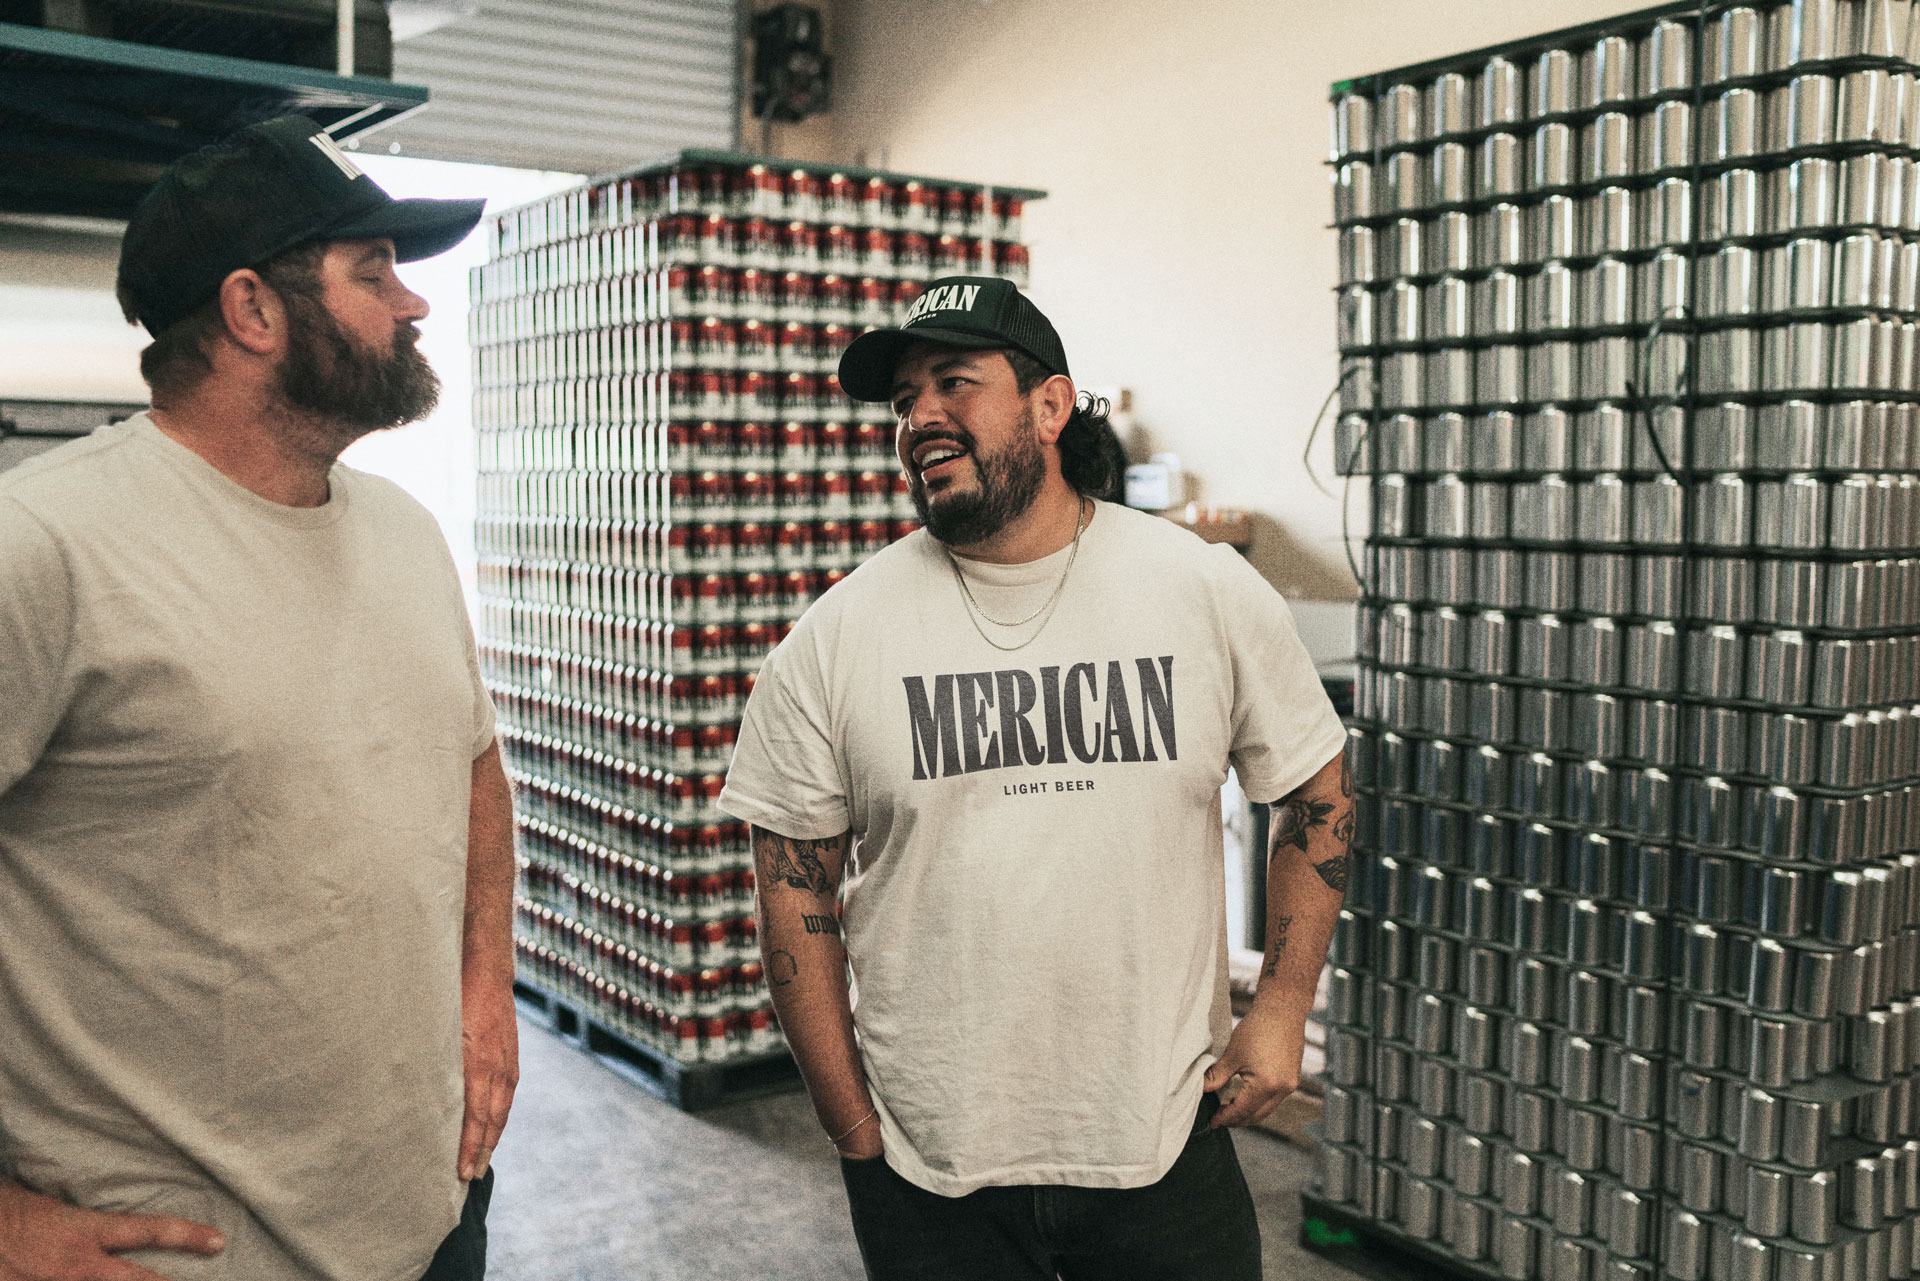 Two Merican staff members talking to each other in the production facility, with large stacks of aluminium beer cans behind them.